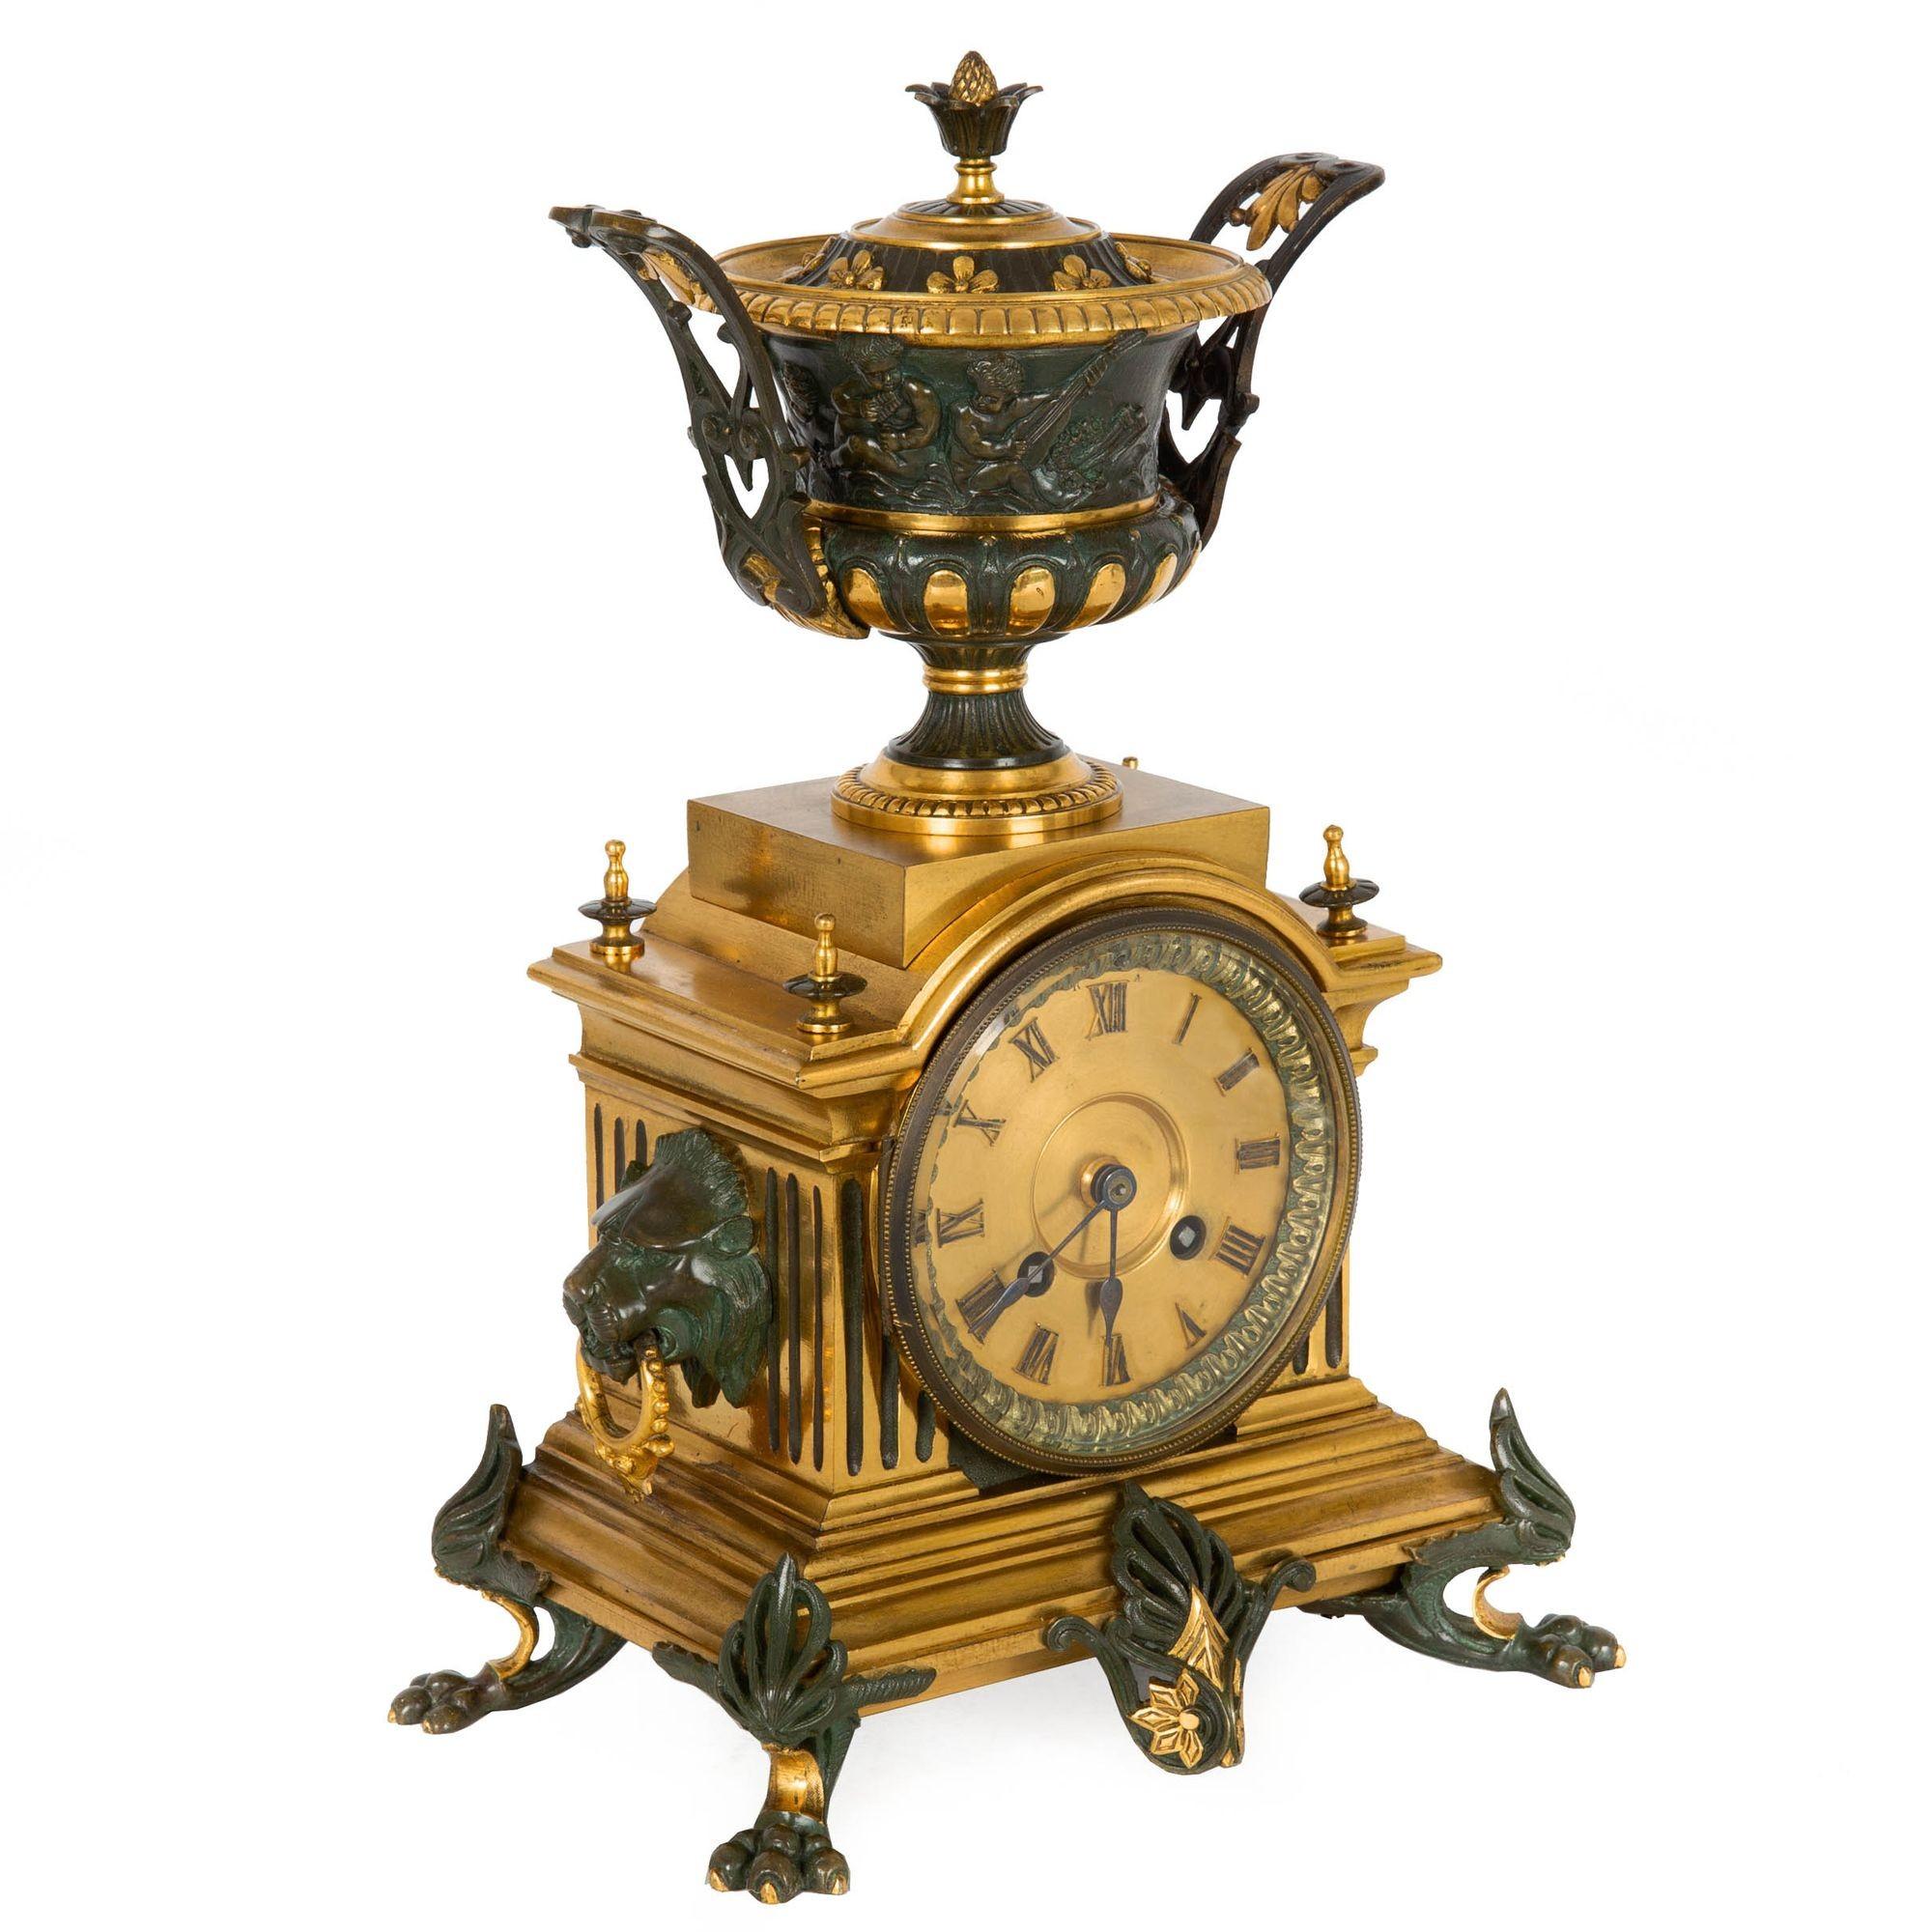 A beautifully cast, chiseled and chased Napoleon III period mantel clock executed in the Neo-Grec taste, the case is surmounted by an urn with exquisitely detailed relief Bacchanalia scenes complete with its lid. The face is covered in a thick